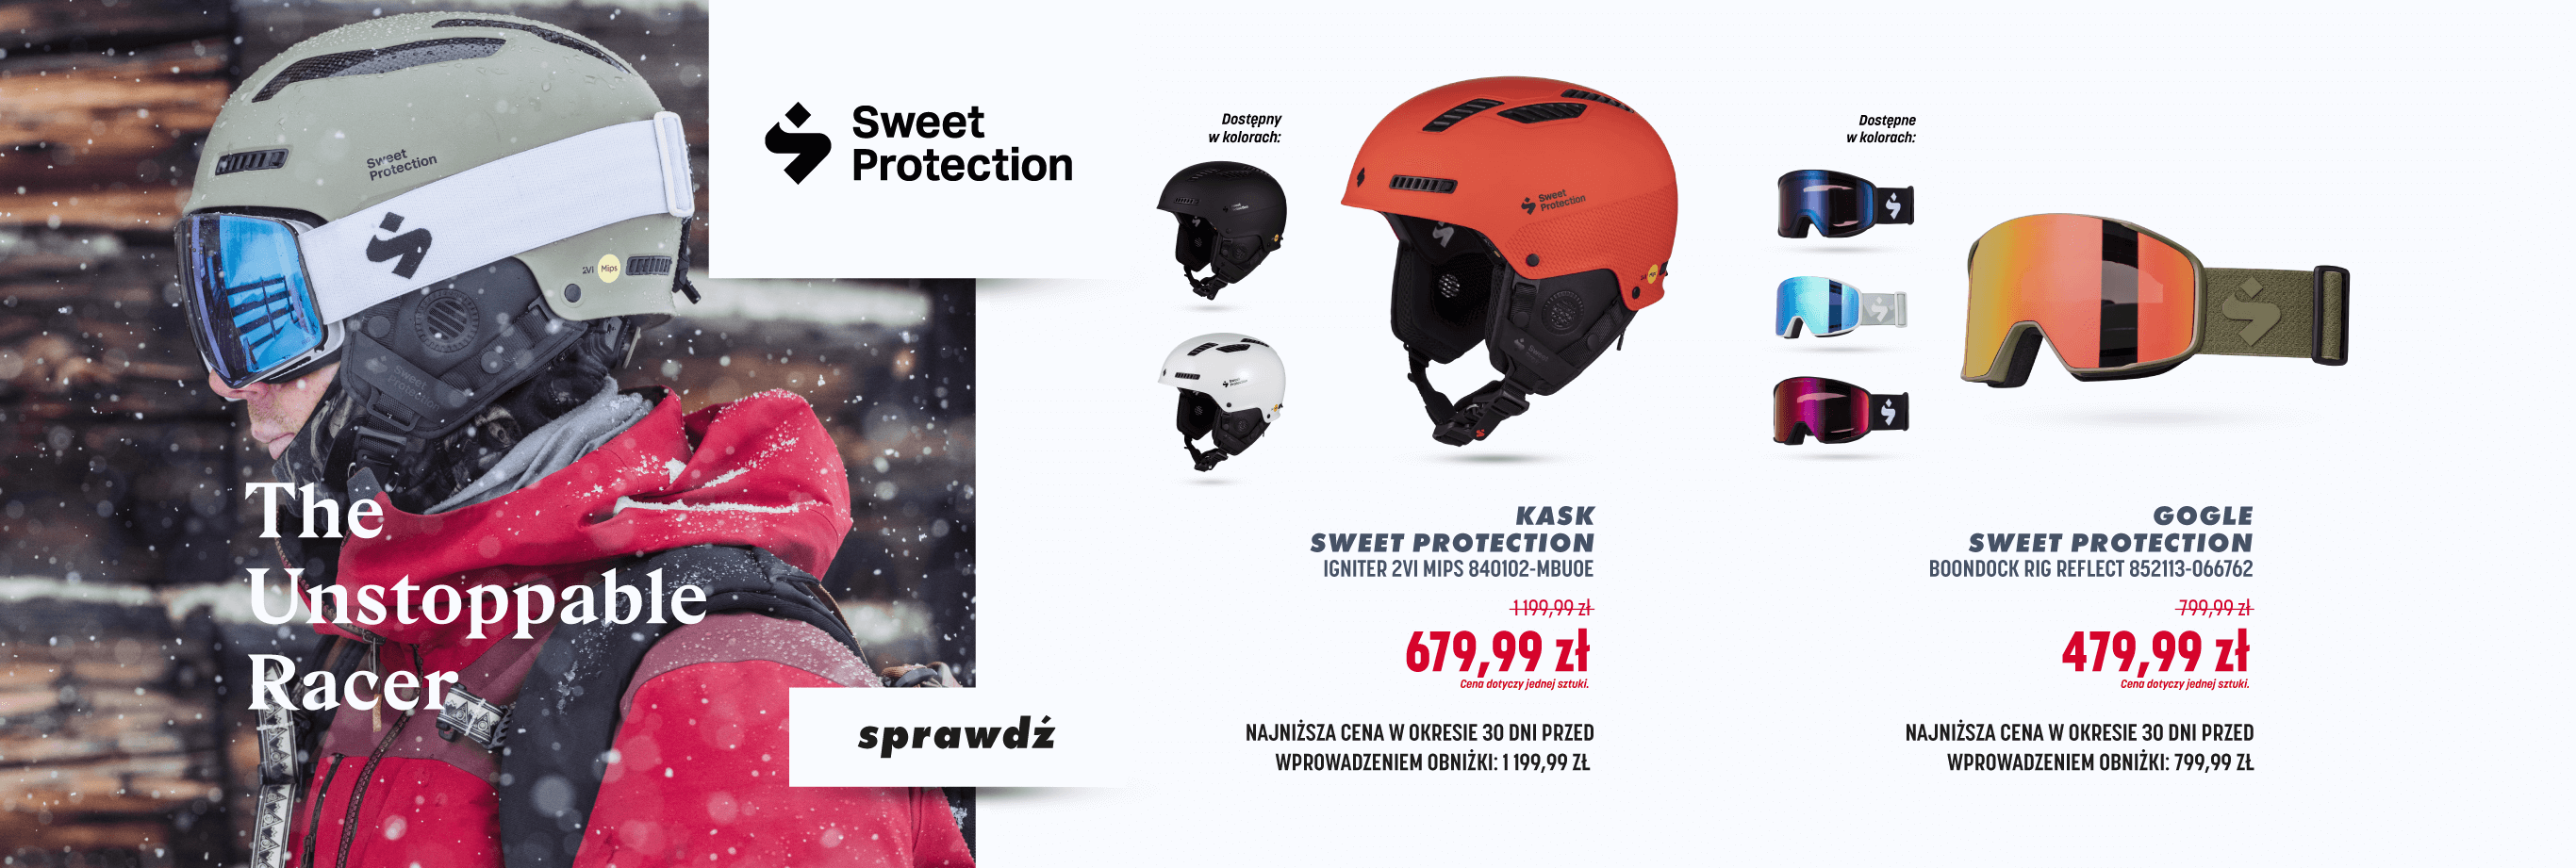 Sweet Protection %